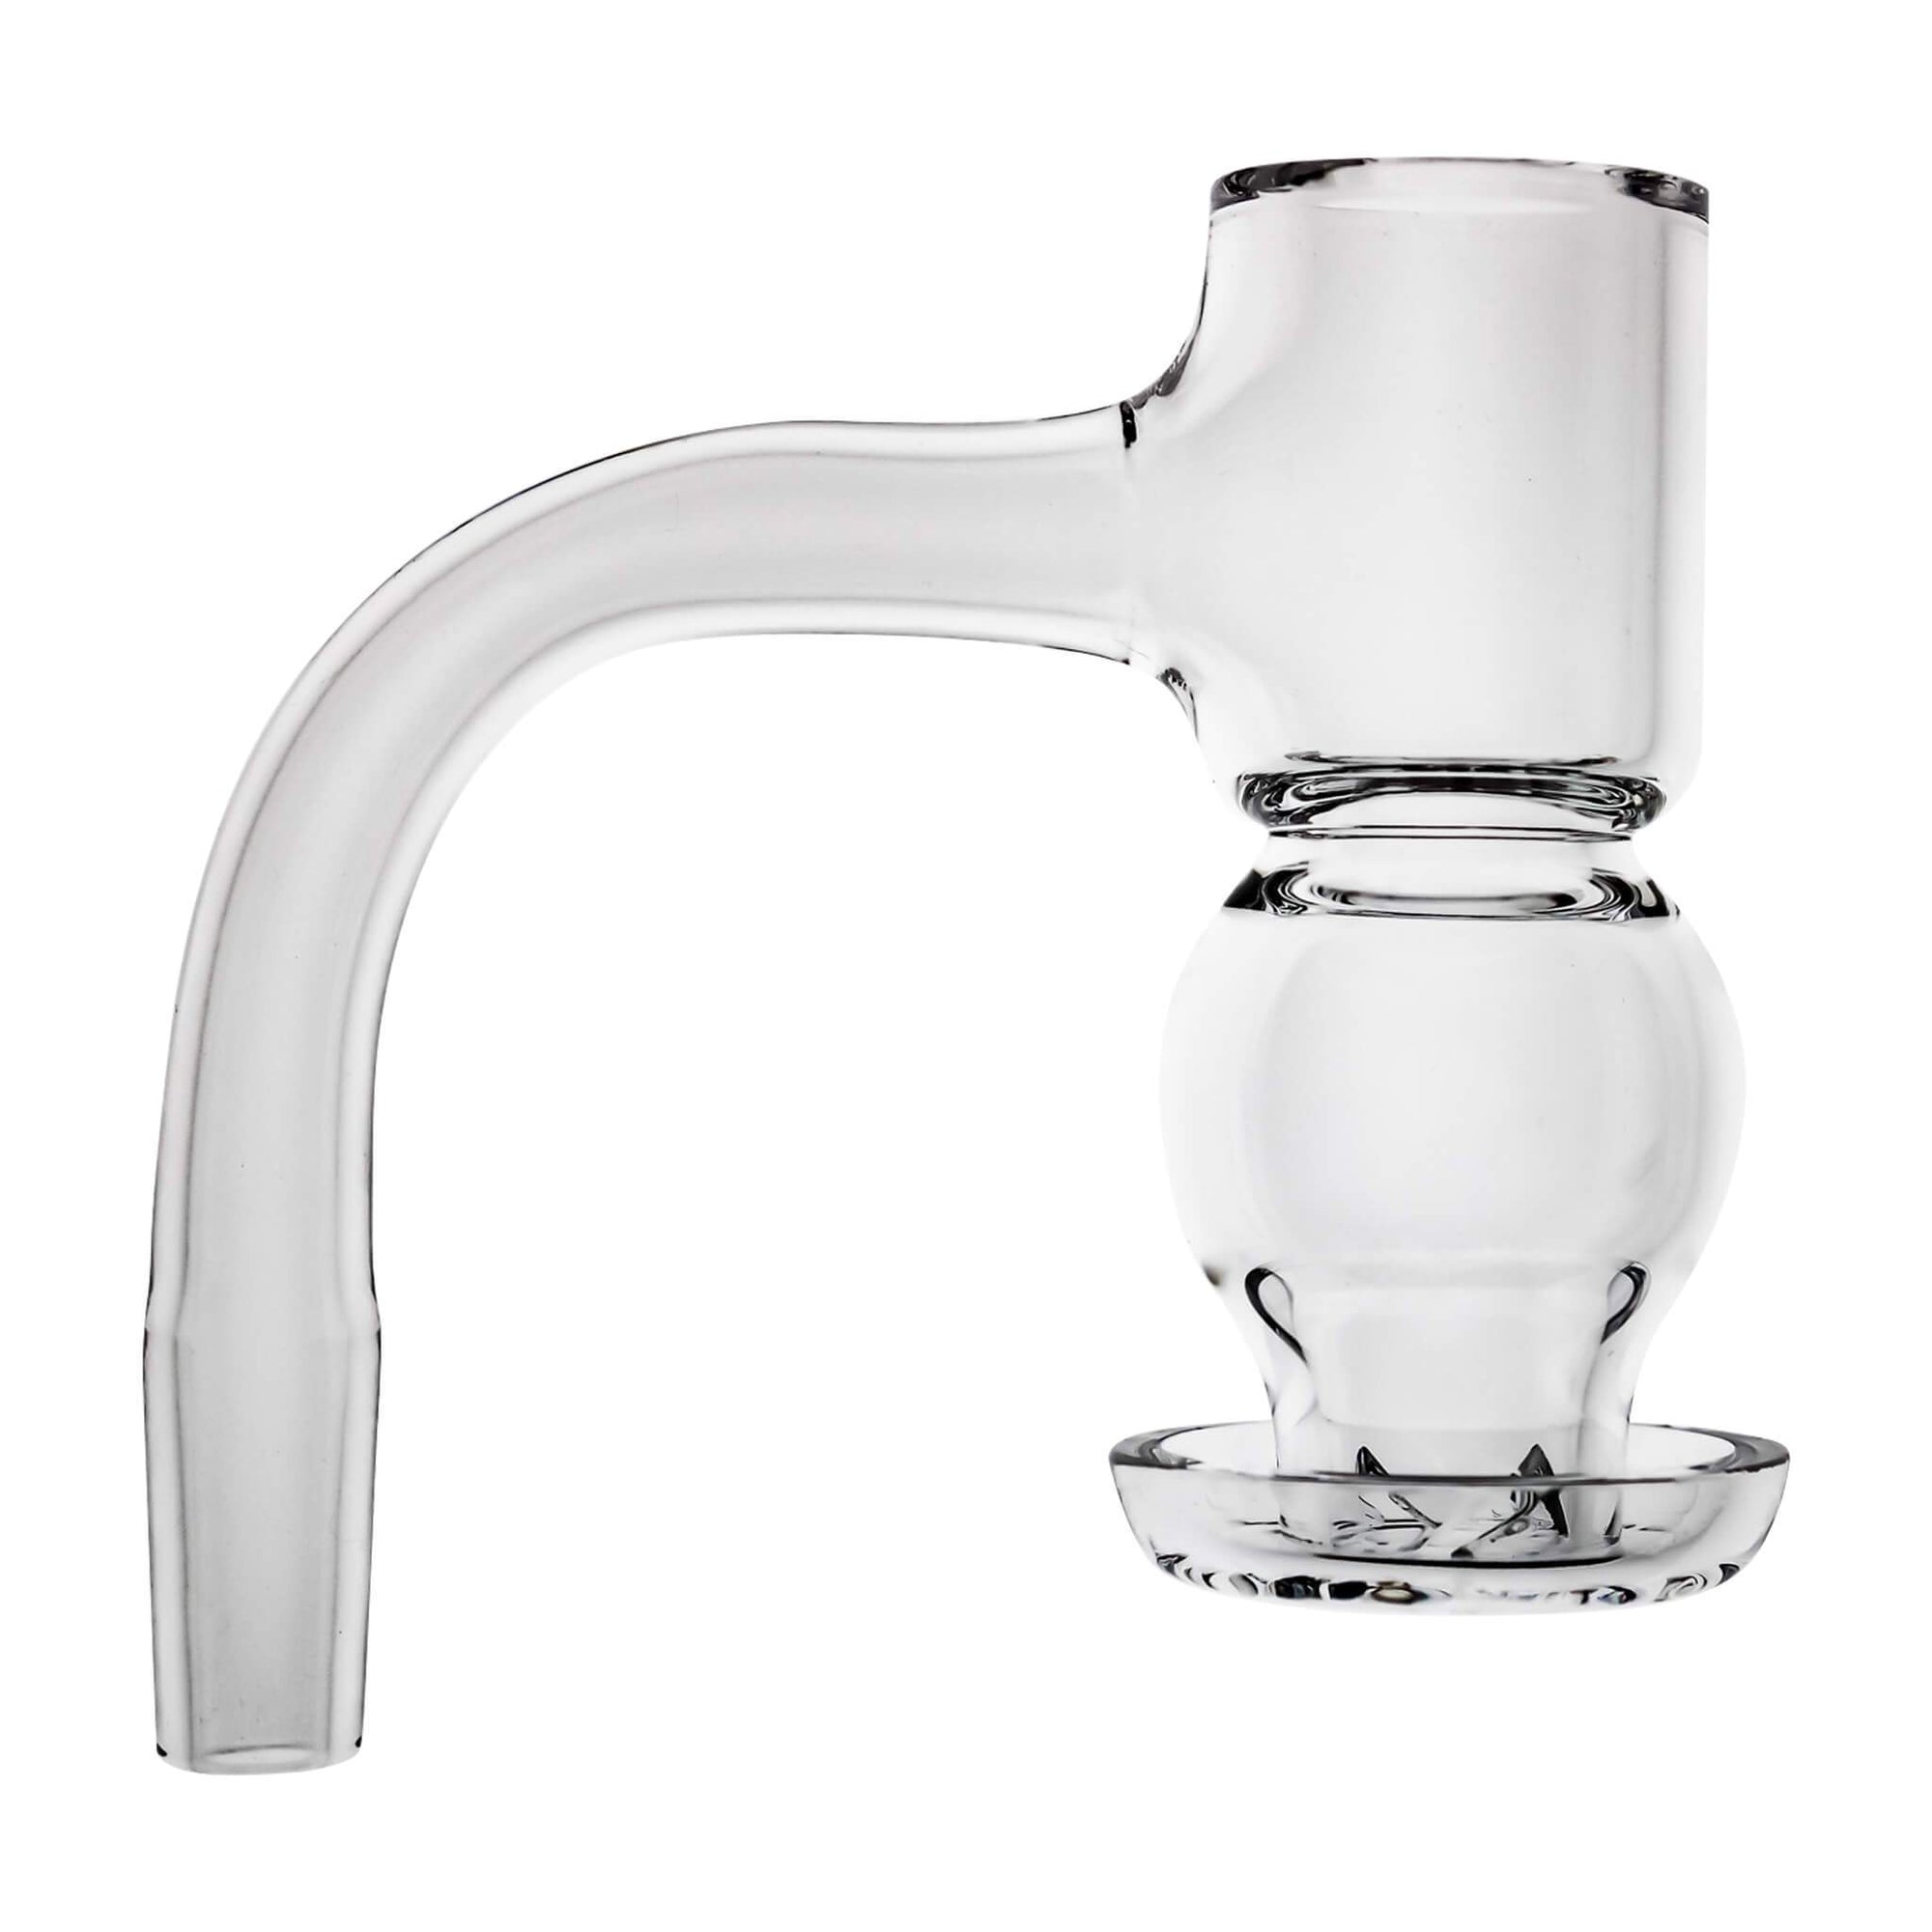 Full Weld Round Belly Terp Slurper | 14mm Male | the dabbing specialists